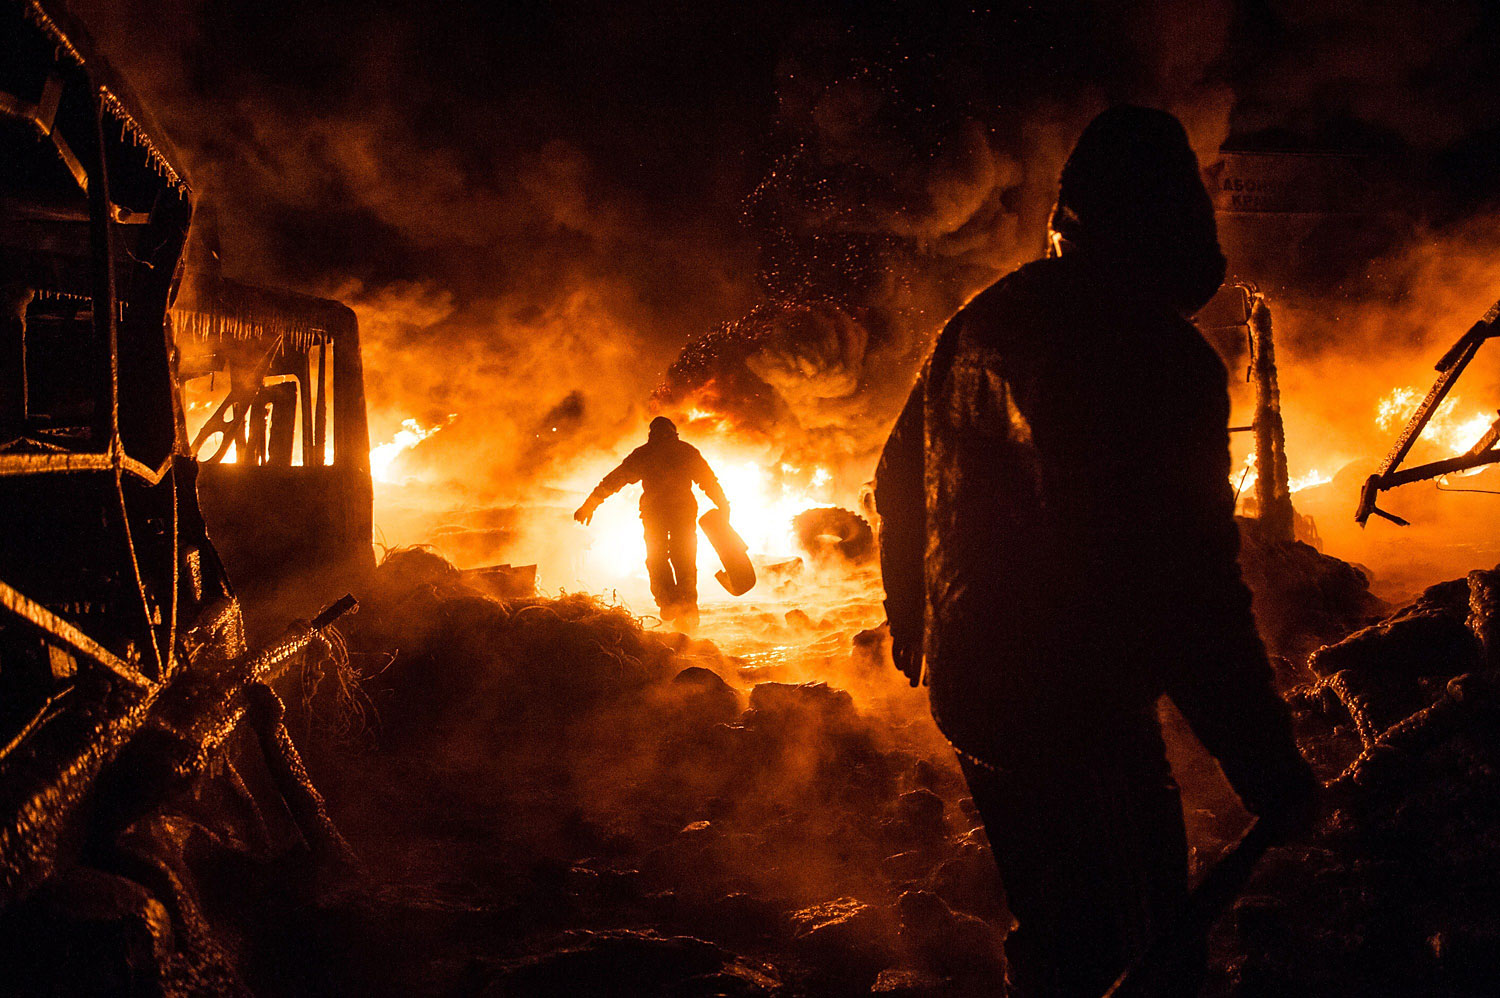 Ukrainian anti-government protesters walk past burning tyres during clashes with riot police in central Kiev early on Jan. 25, 2014.